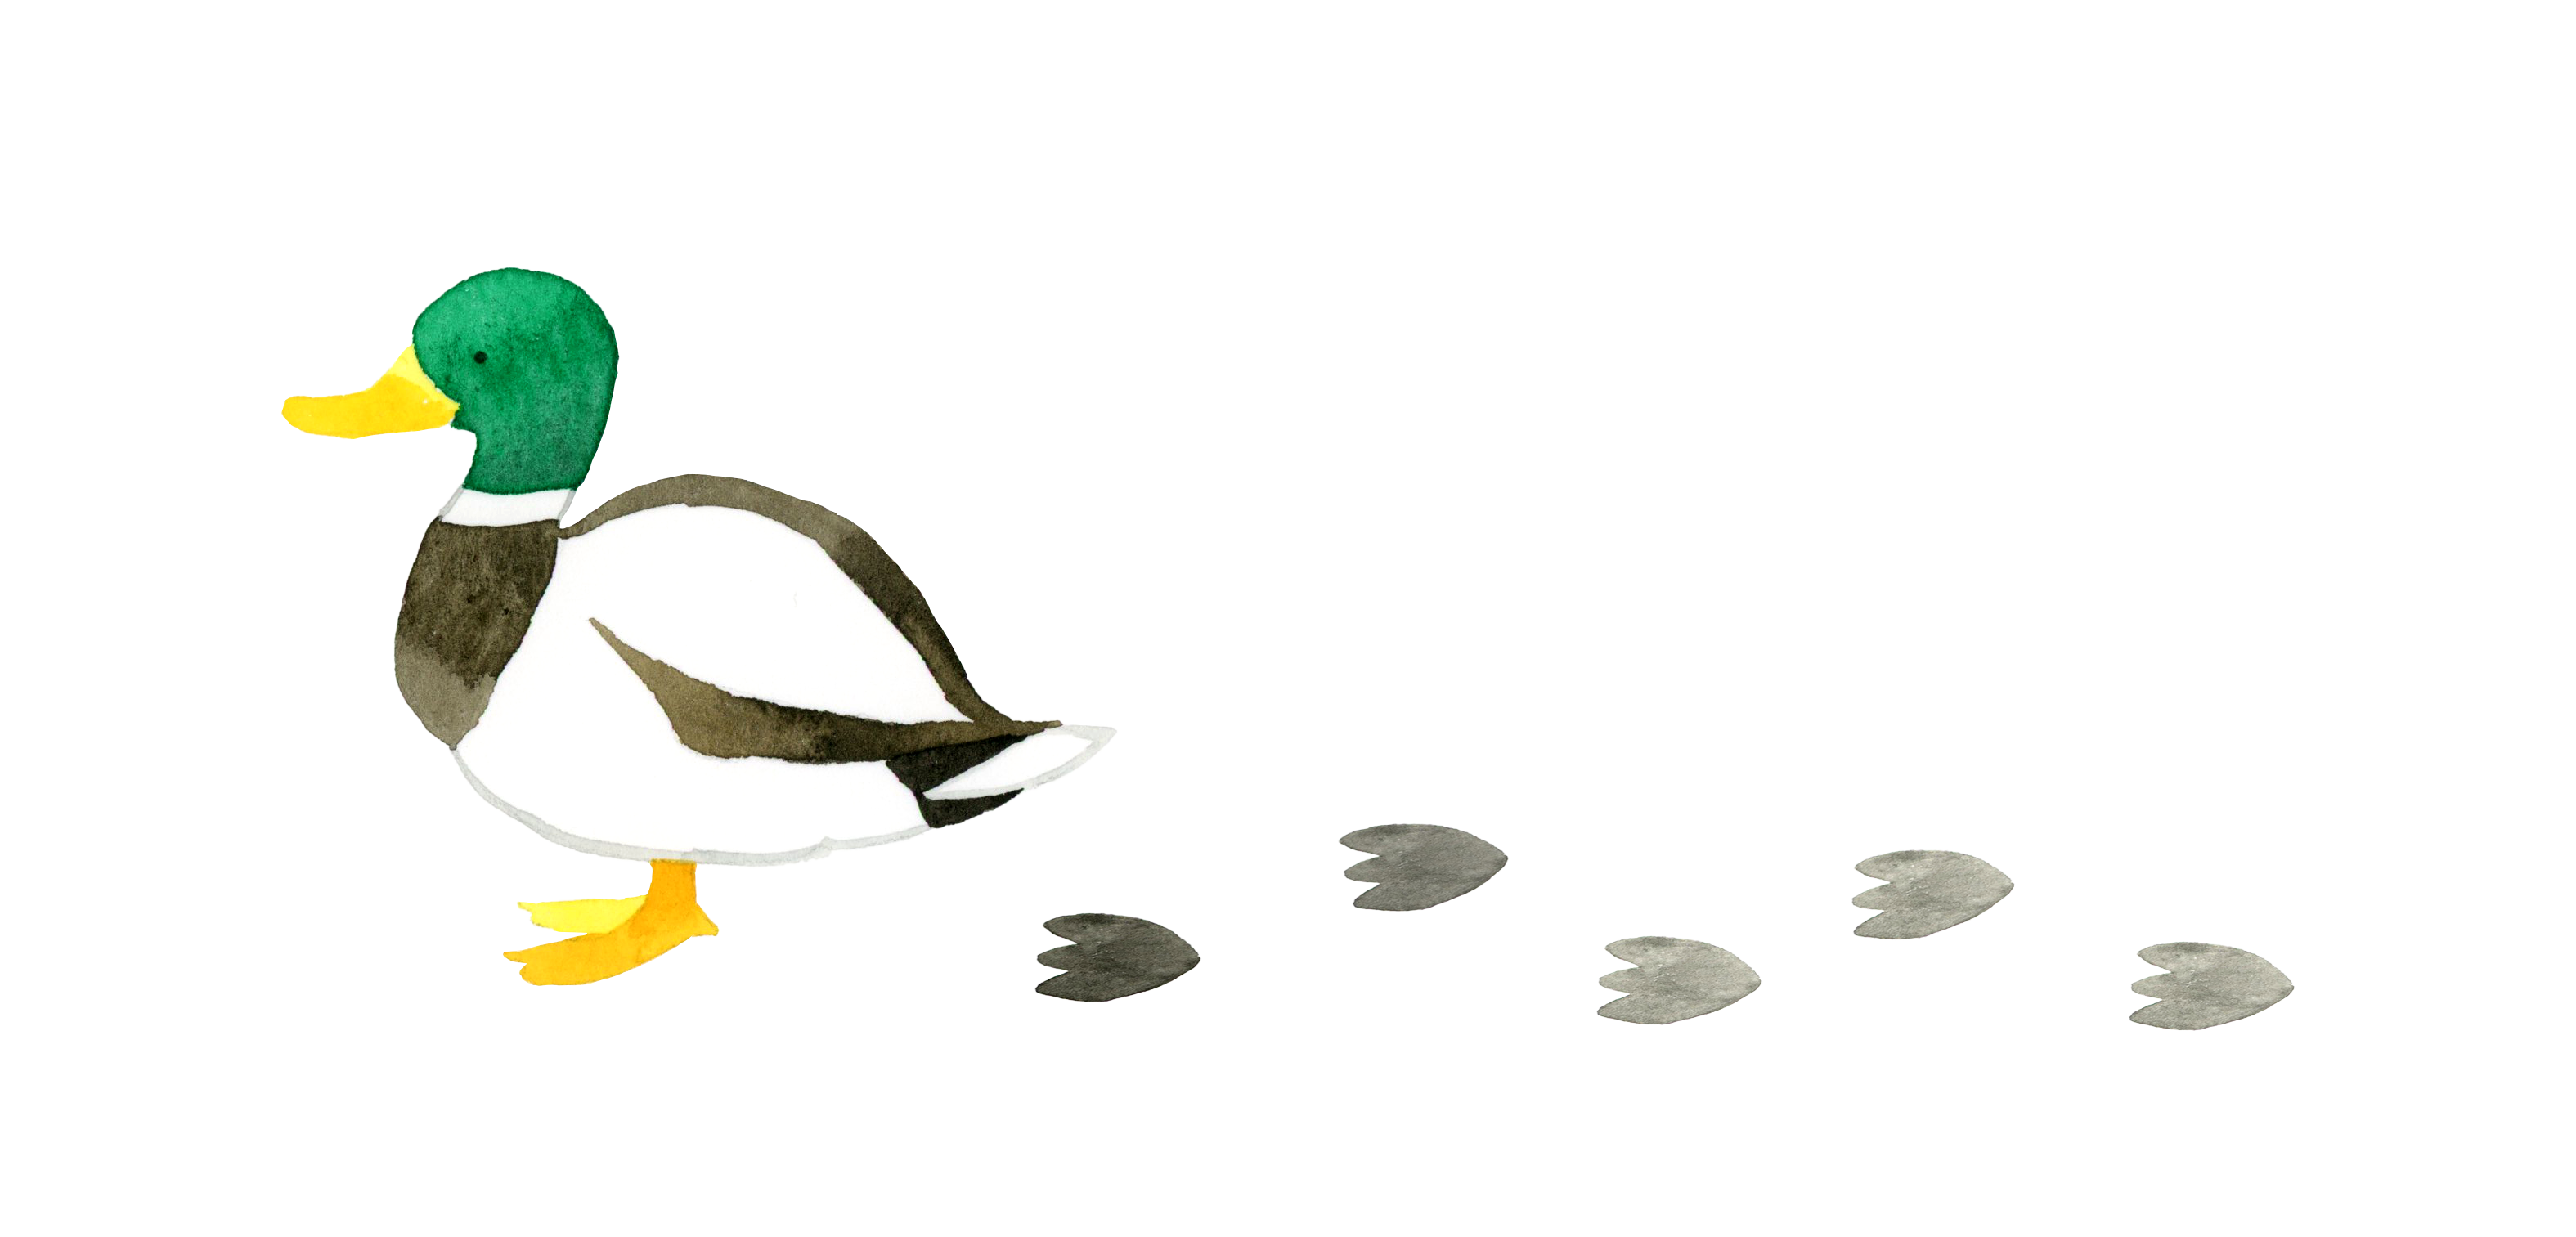 An illustration of a duck with footprints on a white background